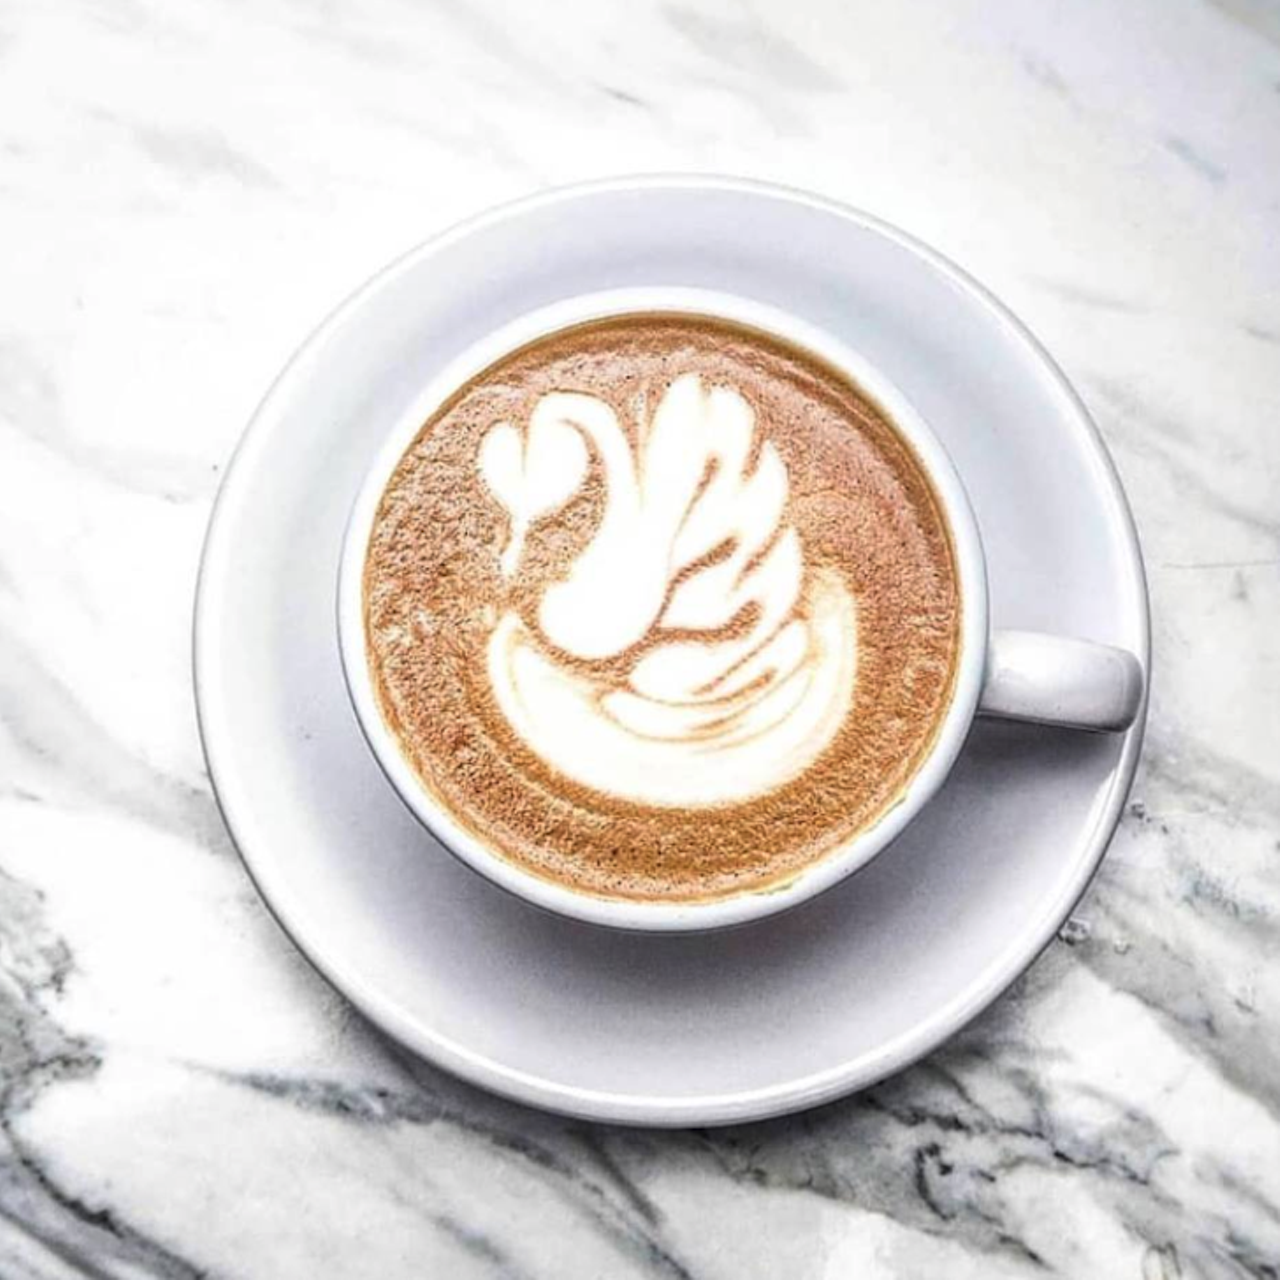 9th Bar Coffee Co.  
949 Huntley Ave, Dunedin, 727-733-2572
Coffee house serving up breakfast bites with potent espresso. You need this latte art on your feed.
Photo via 9th Bar Coffee Co/ Facebook